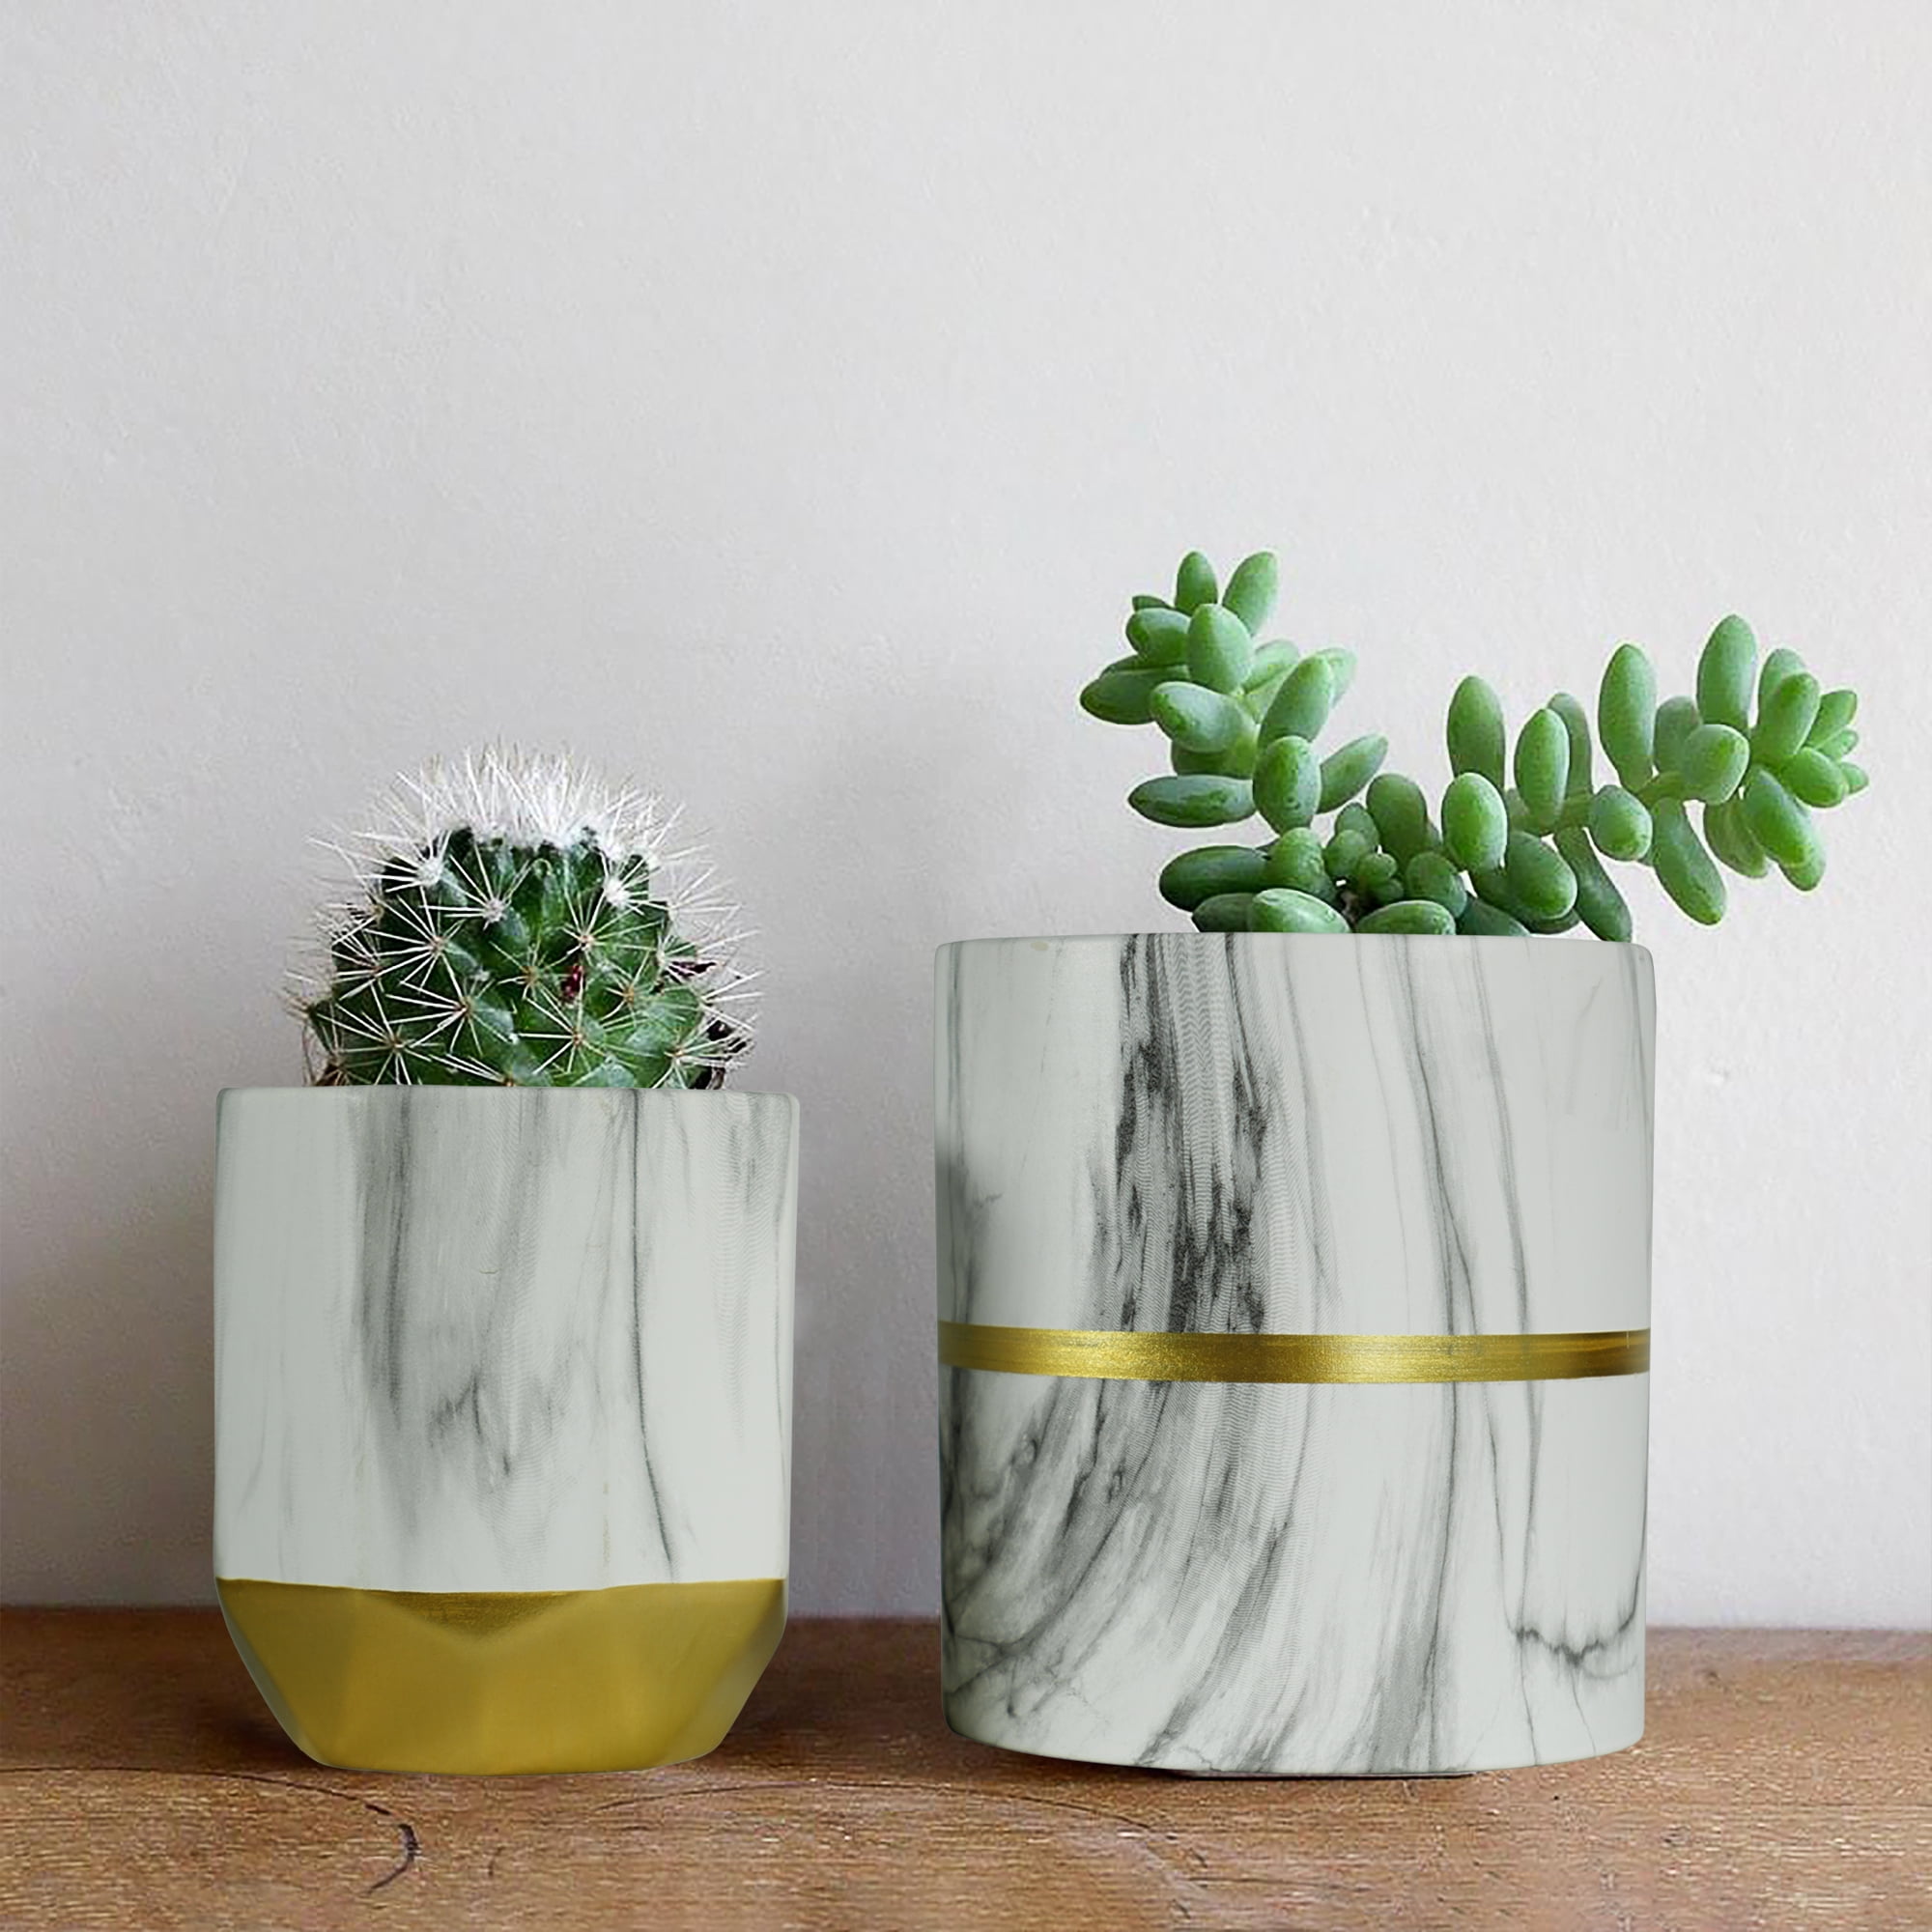 Marble Pattern Pots Set of 3 - Grey Planters